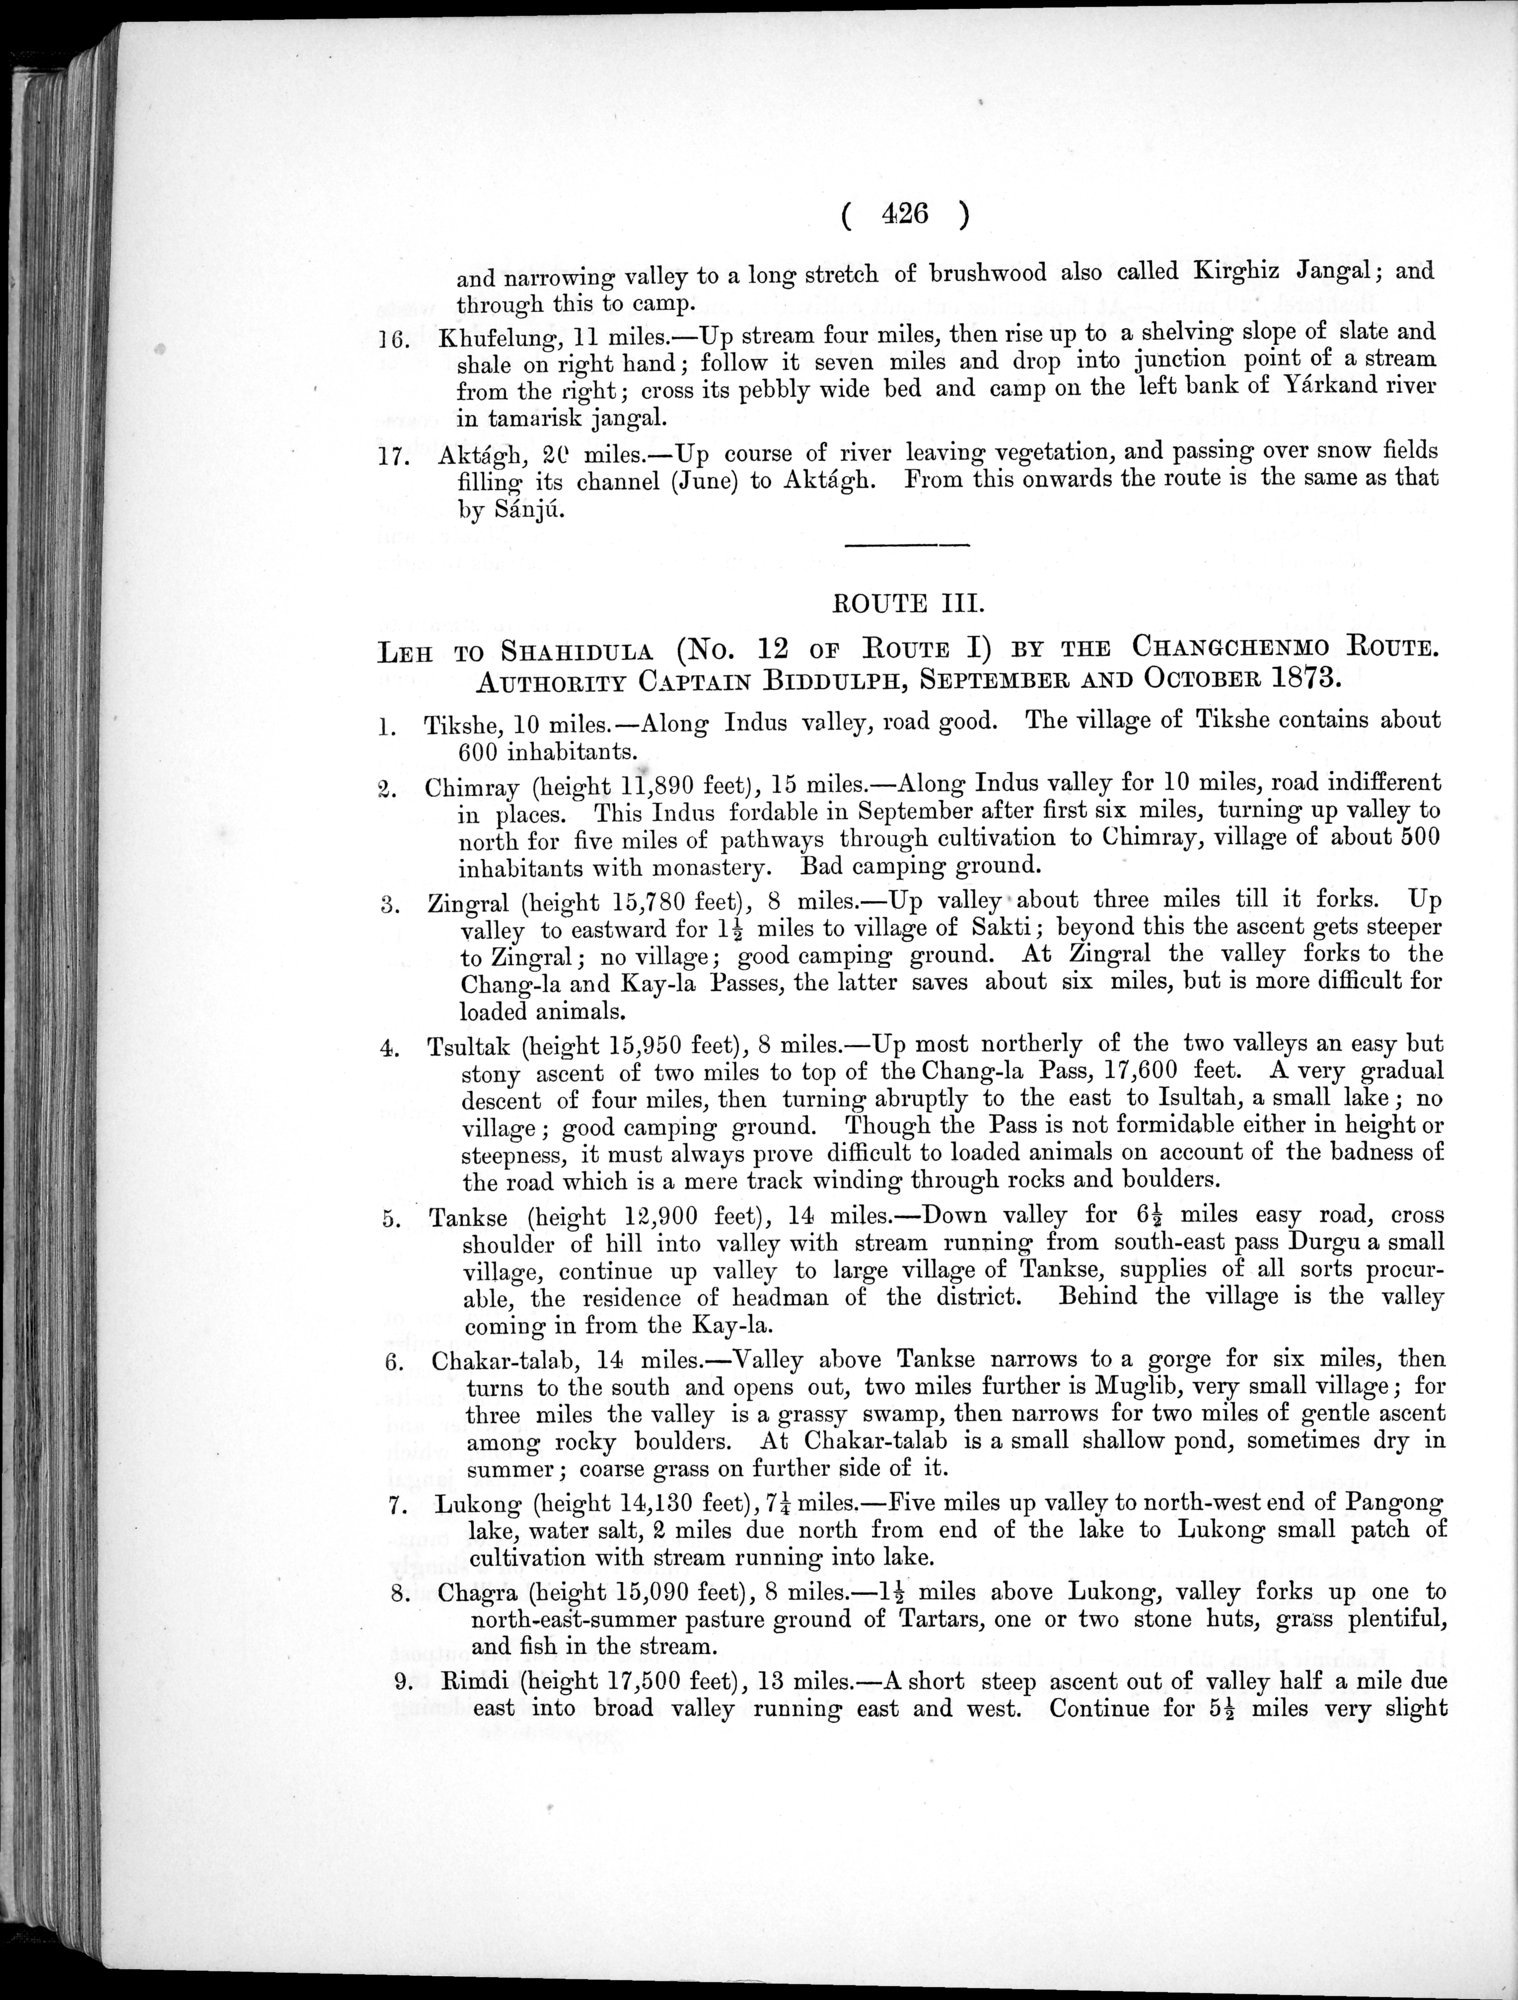 Report of a Mission to Yarkund in 1873 : vol.1 / Page 560 (Grayscale High Resolution Image)